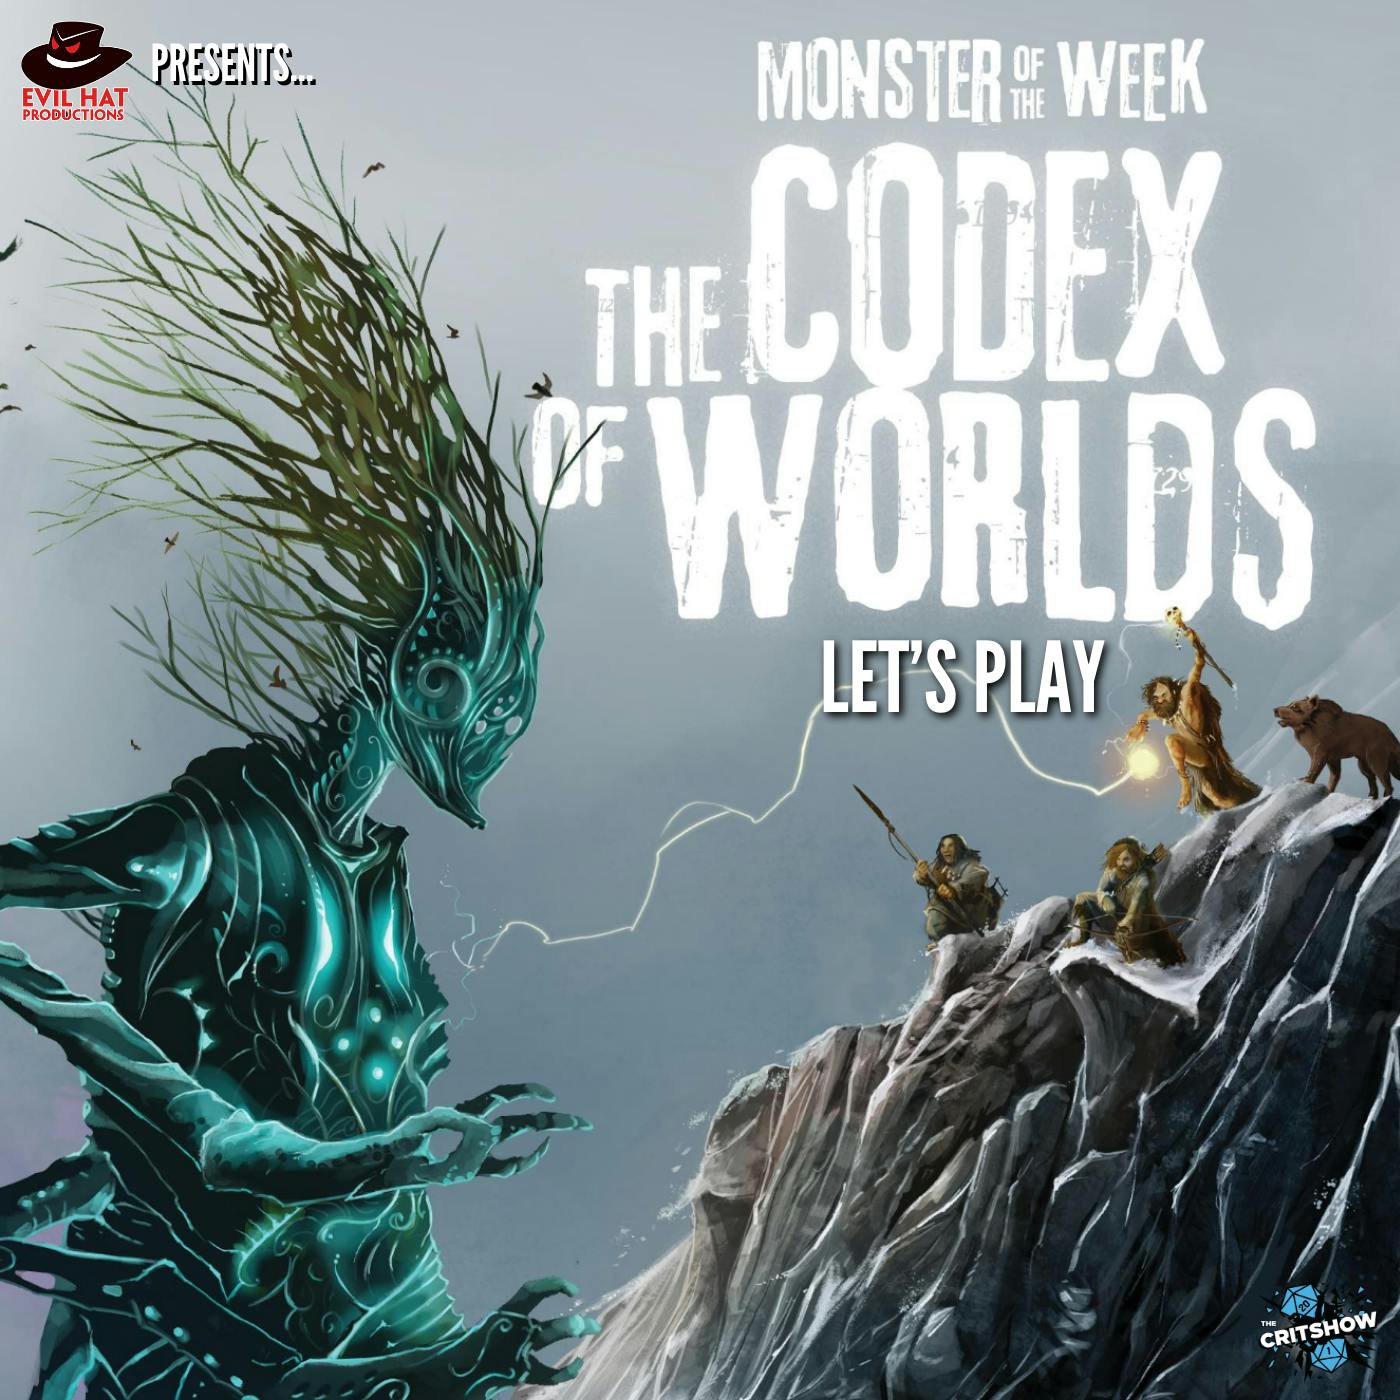 The Critshow: The Codex of Worlds (Pt 2)